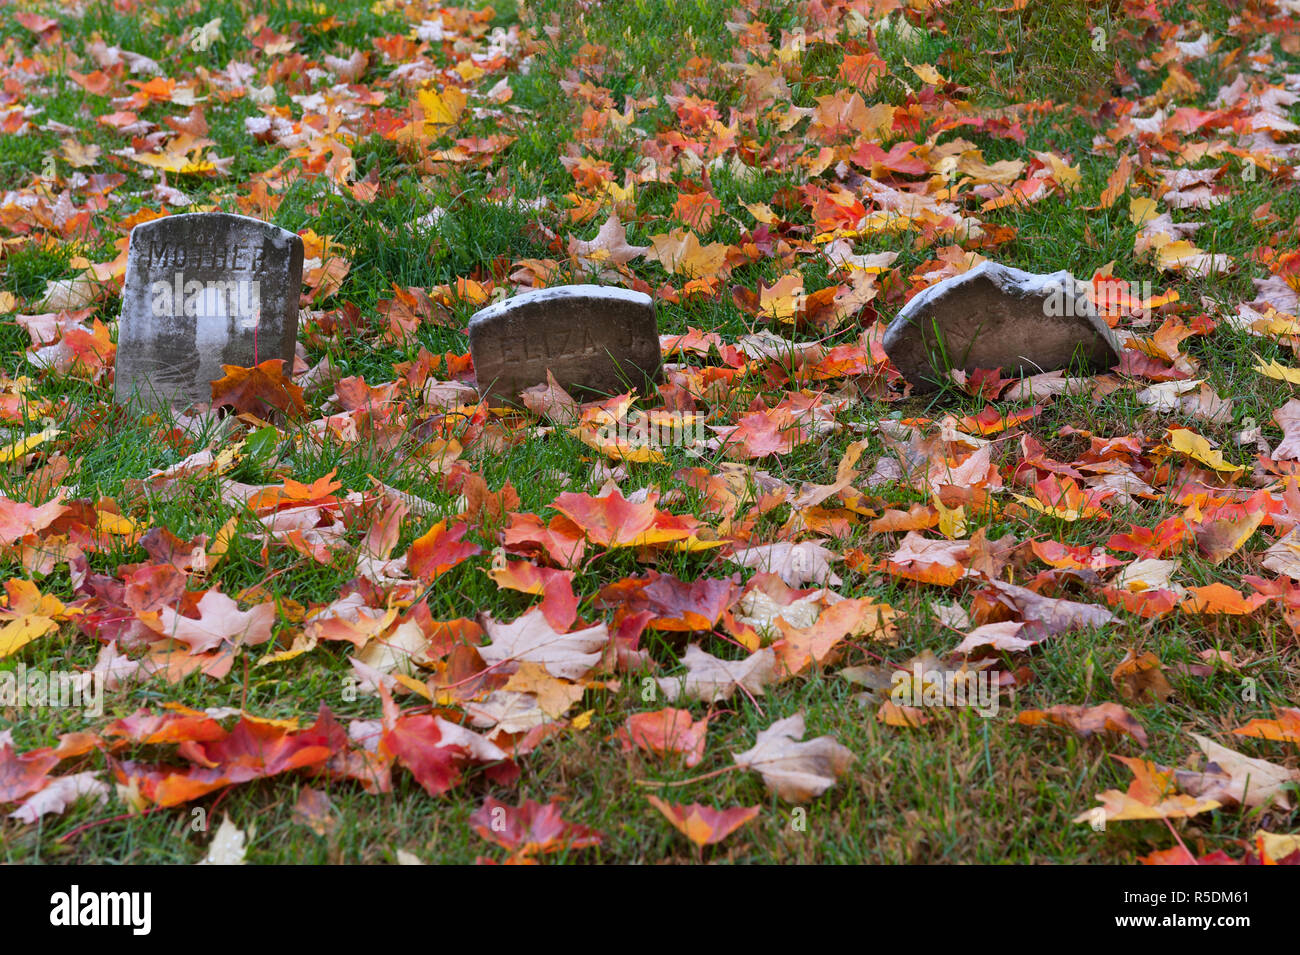 Small falling headstones surrounded by dead maple leaves Stock Photo